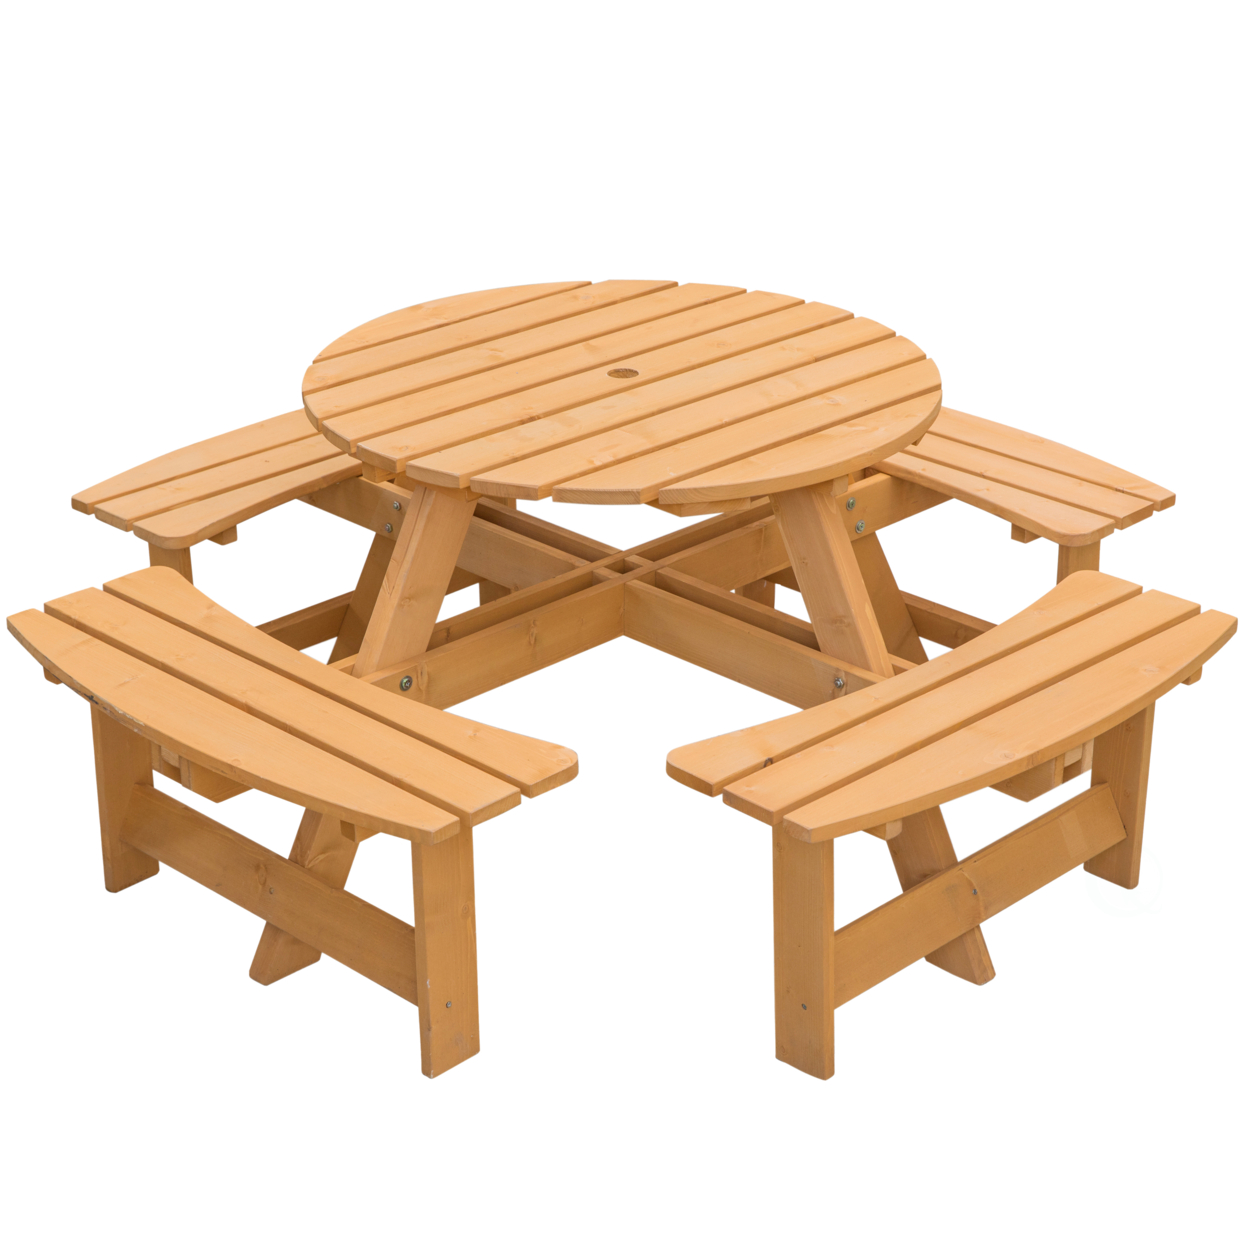 Wooden Outdoor Patio Garden Round Picnic Table With Bench, 8 Person - Stained